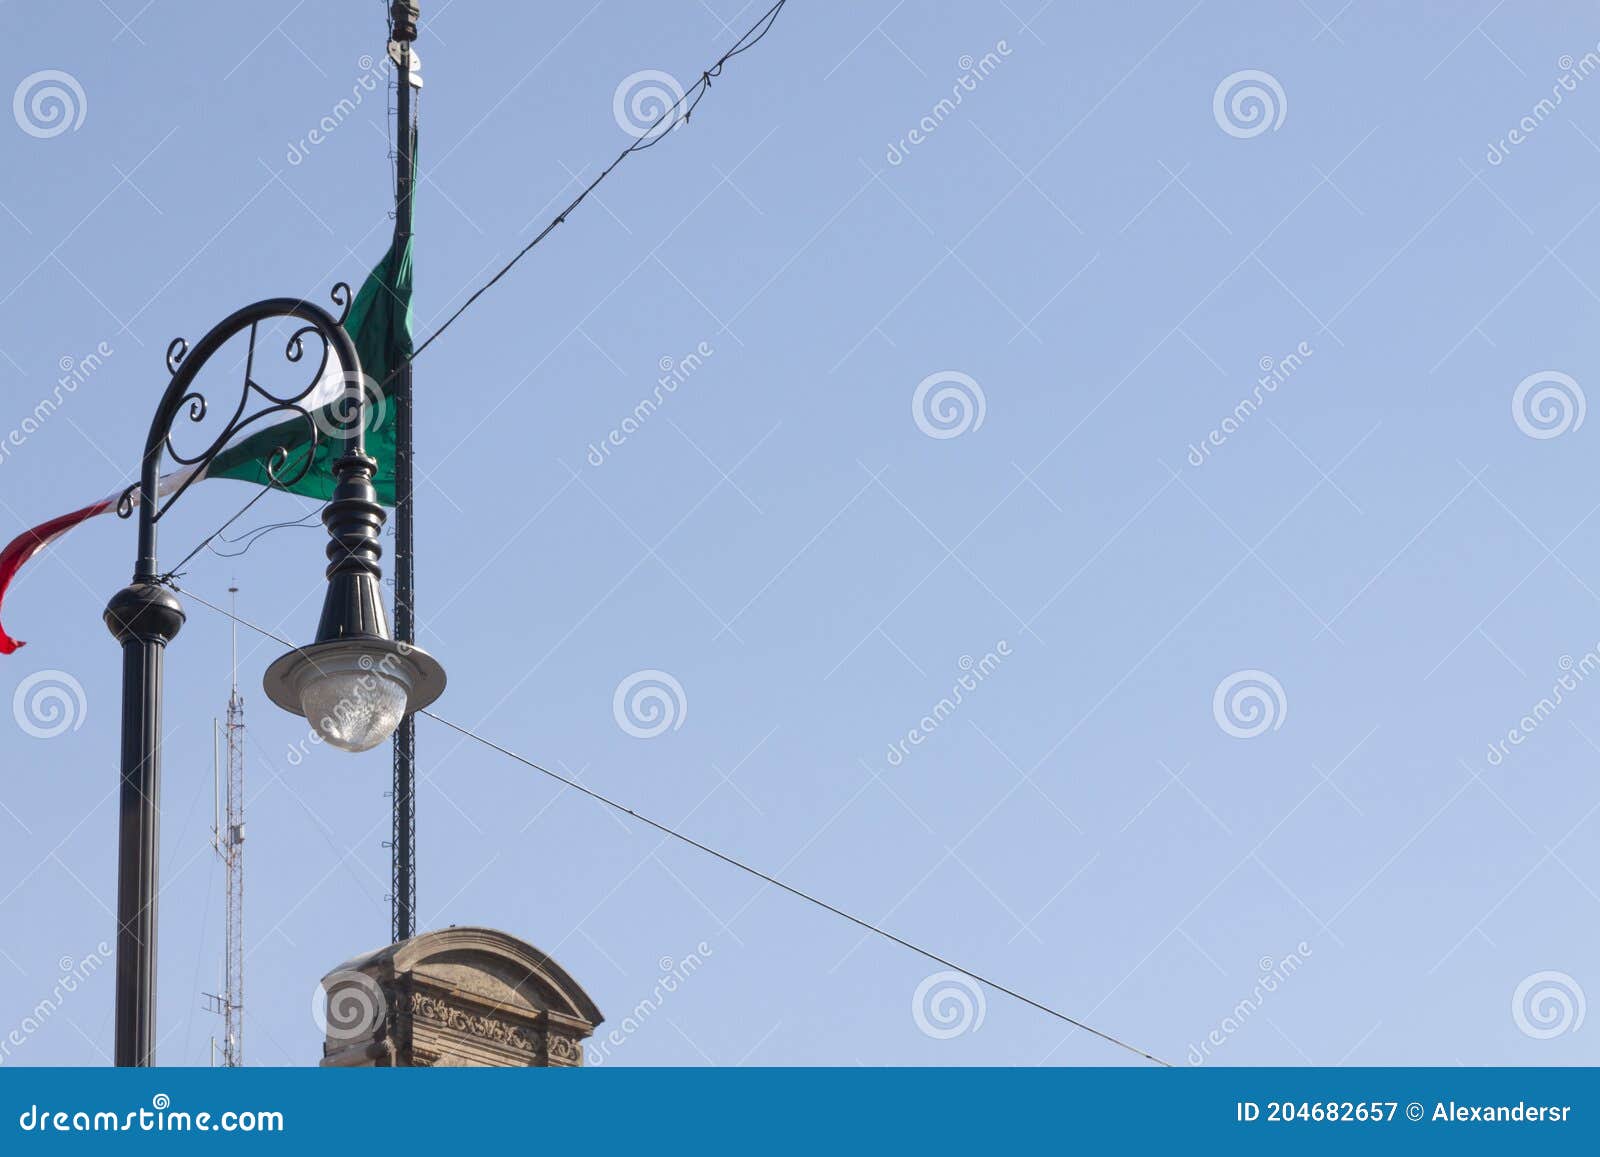 details of public lamp with blue sky background  in palacio de gobierno or national palace